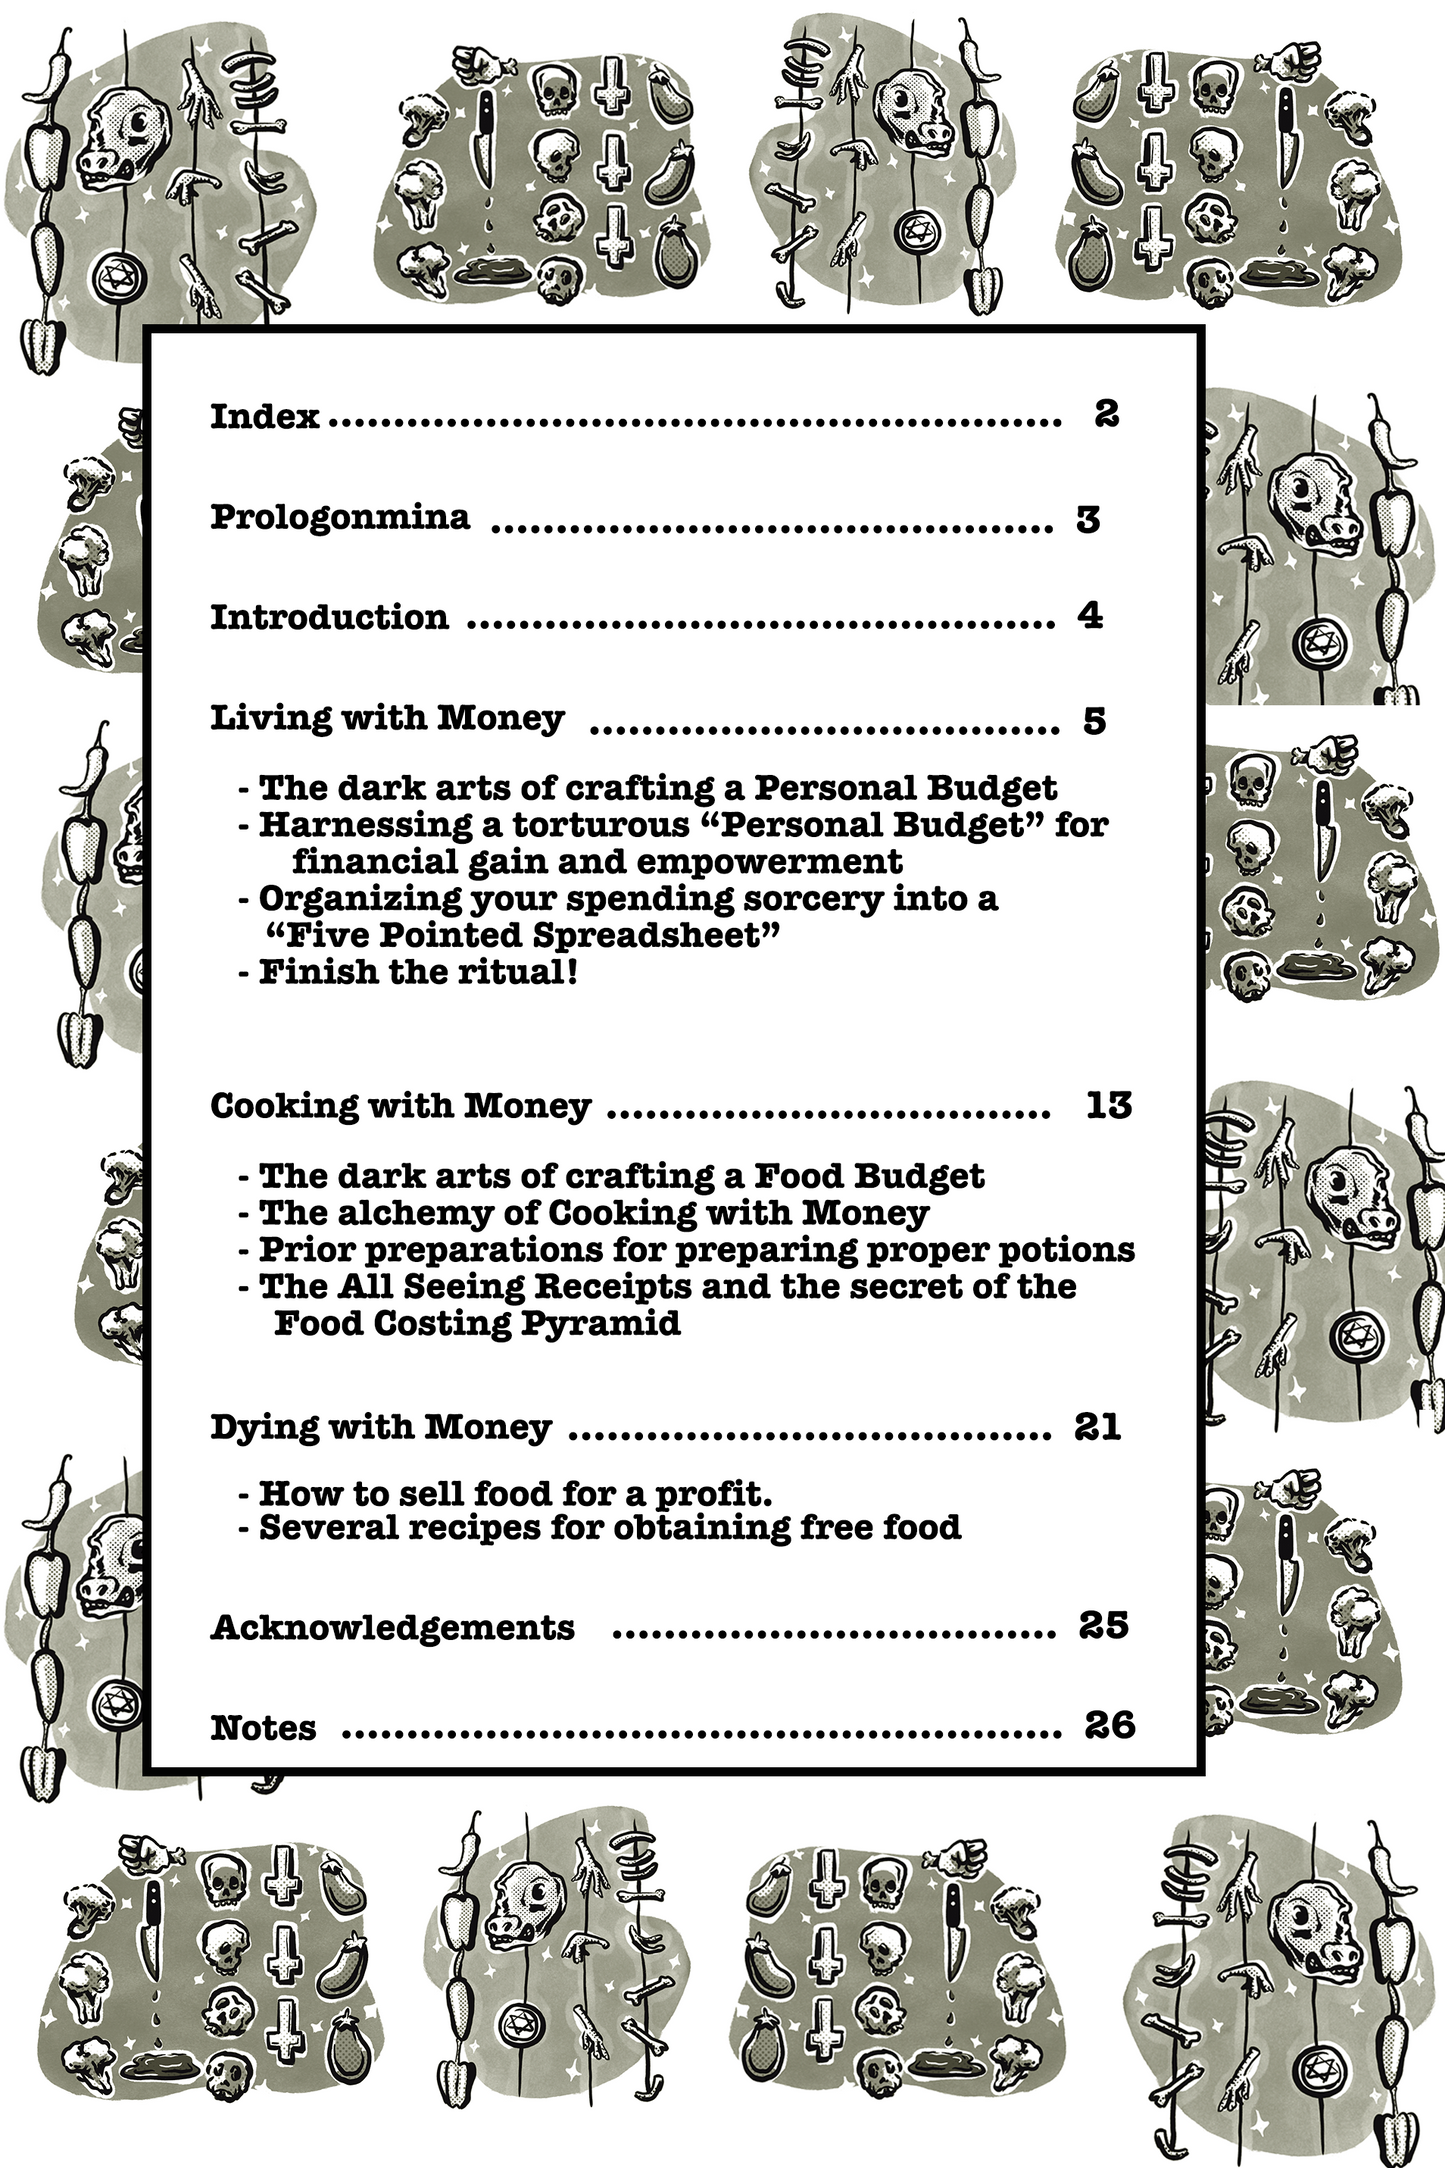 The Book of the Fed: Cooking with Money (limited run)